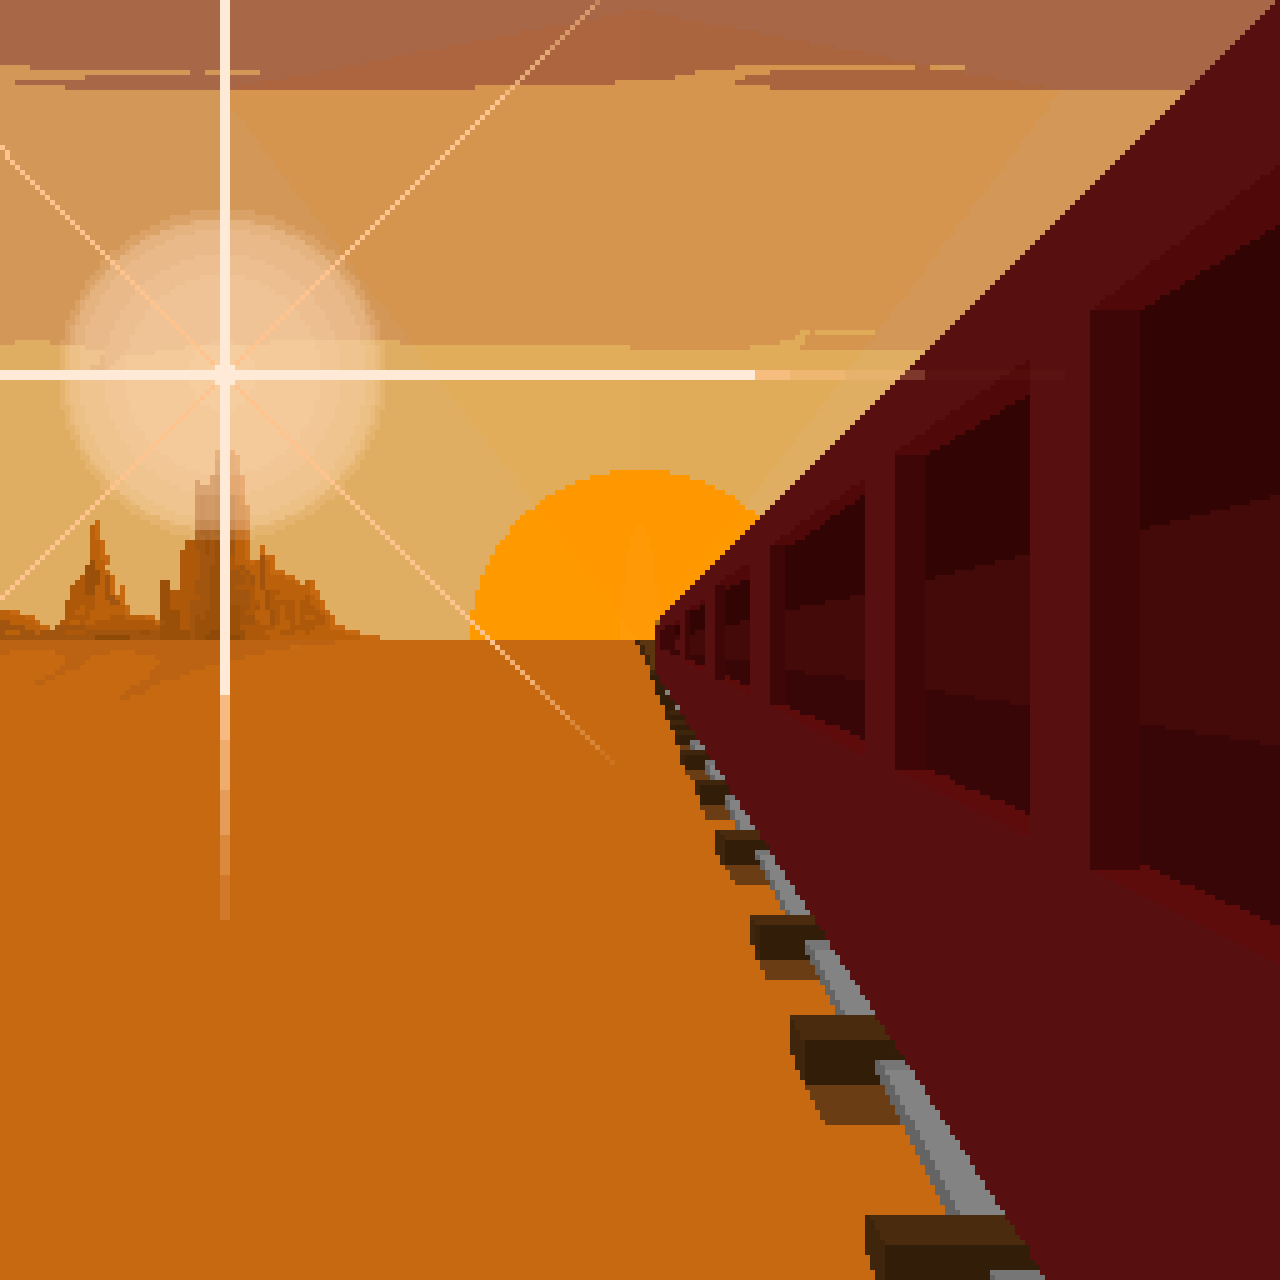 A view of a train during a sunset on rails that go through a desert. There is a palace in the distance shining very brightly.